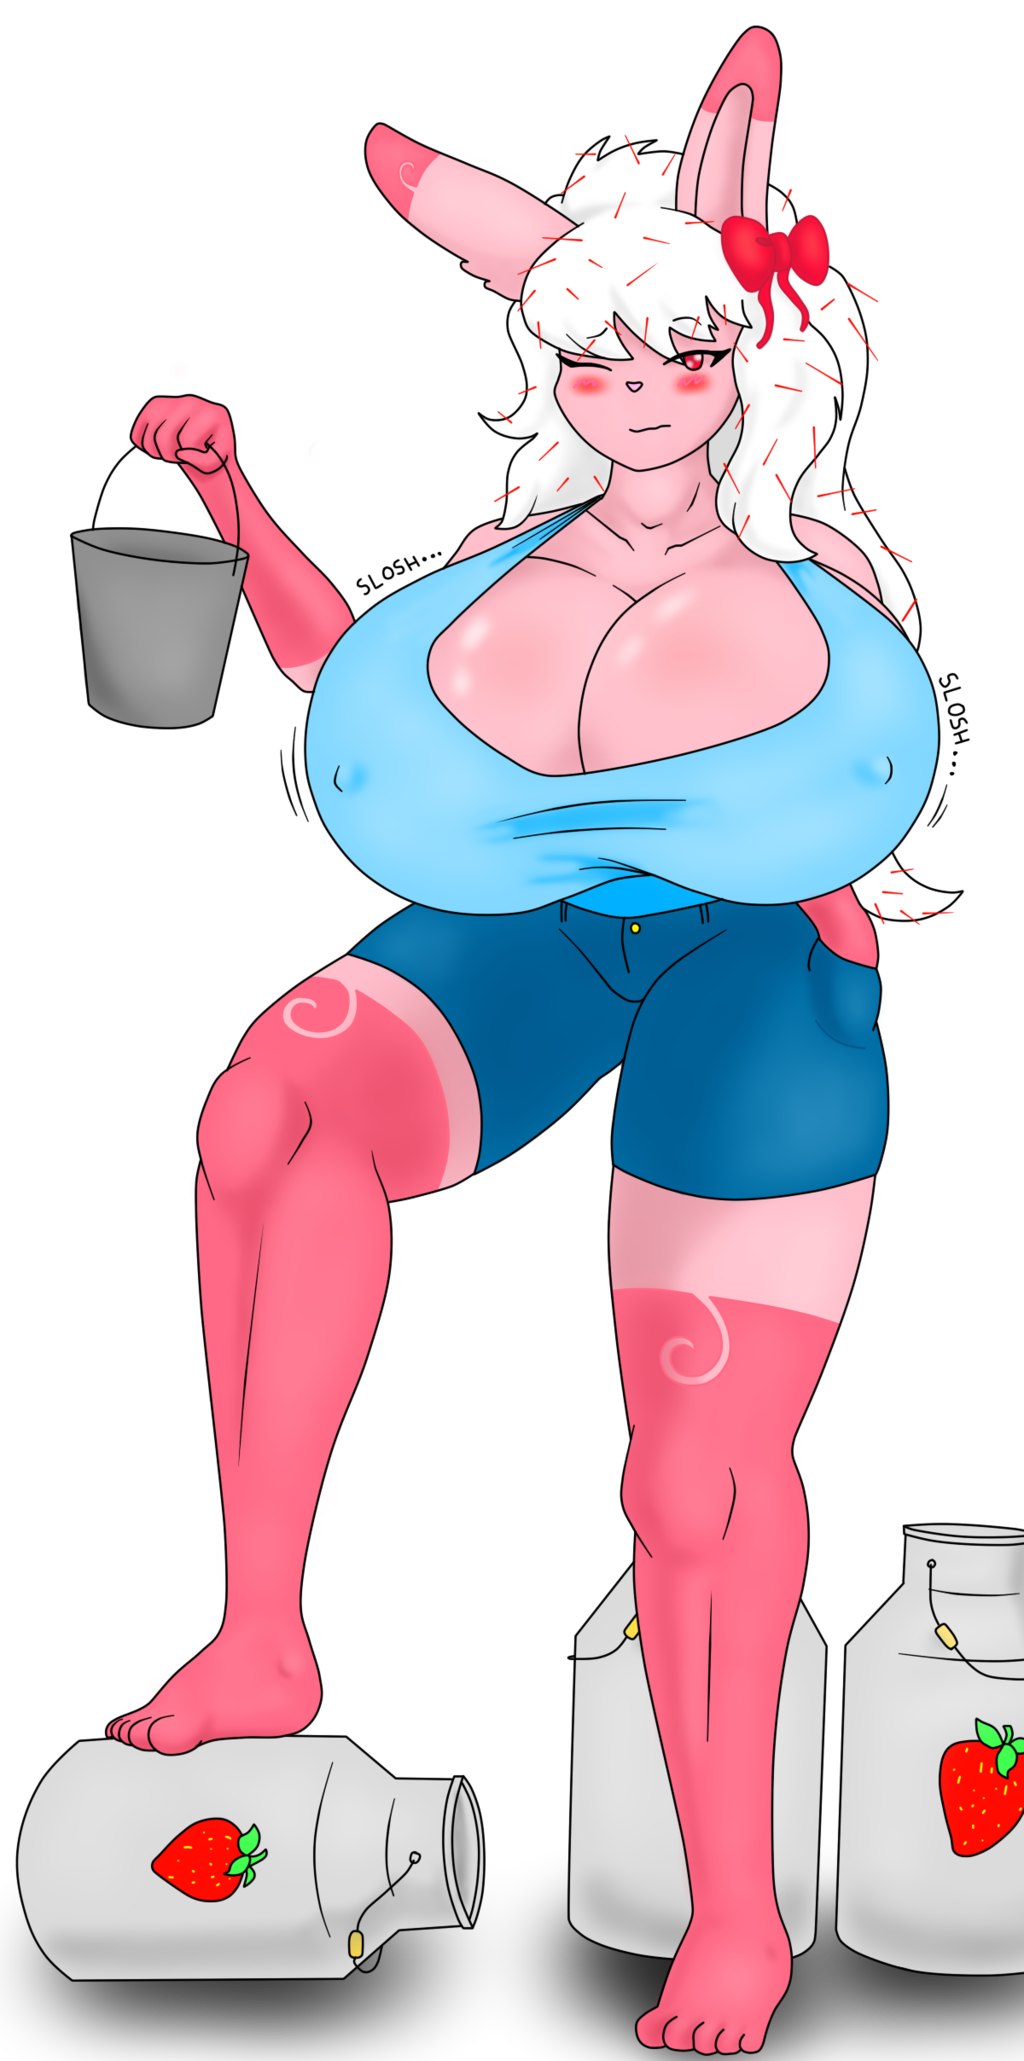 So I got the idea that this strawberry bunny, who now is known as Roxanne, ...